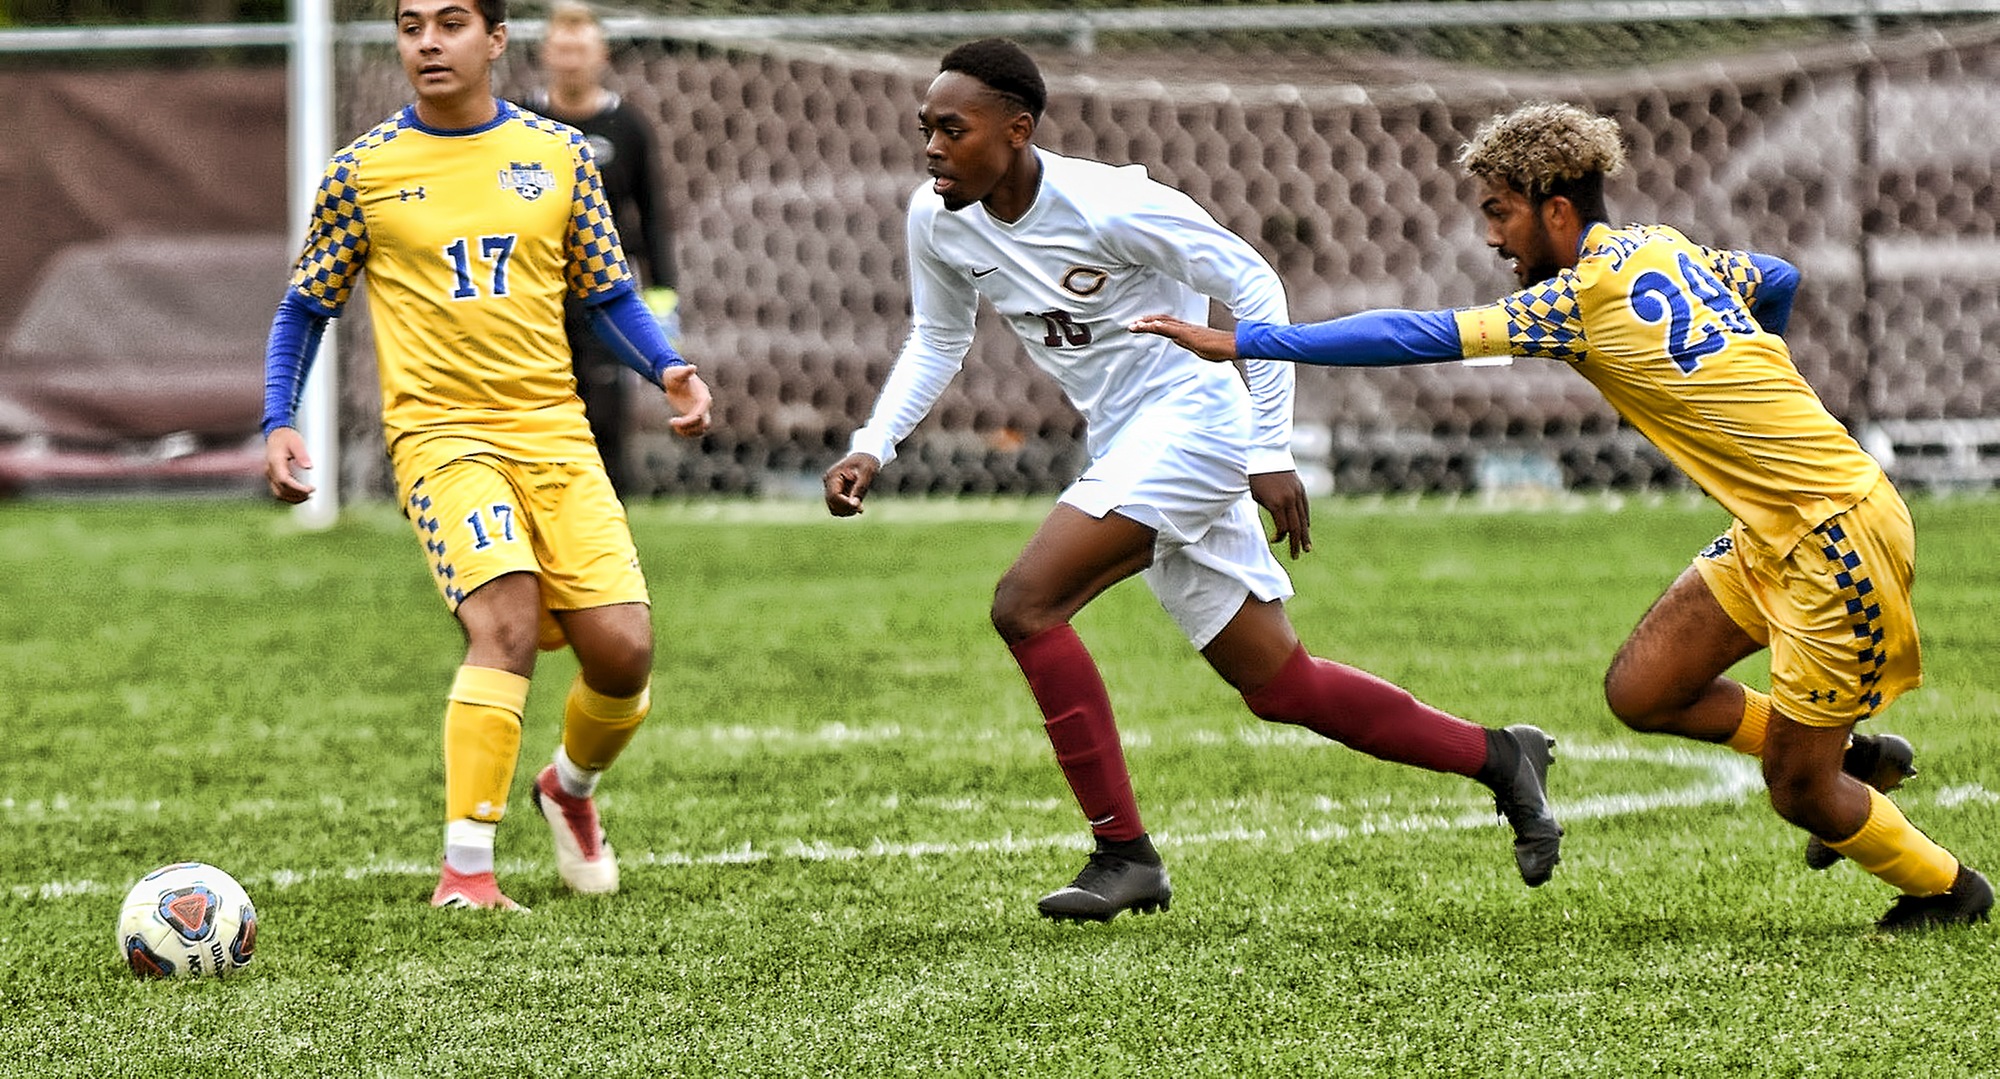 Nigaba Olivier dribbles throught the St. Scholastica defense in the Cobbers' win. He scored his first collegiate goal in the team's 4-goal second half.